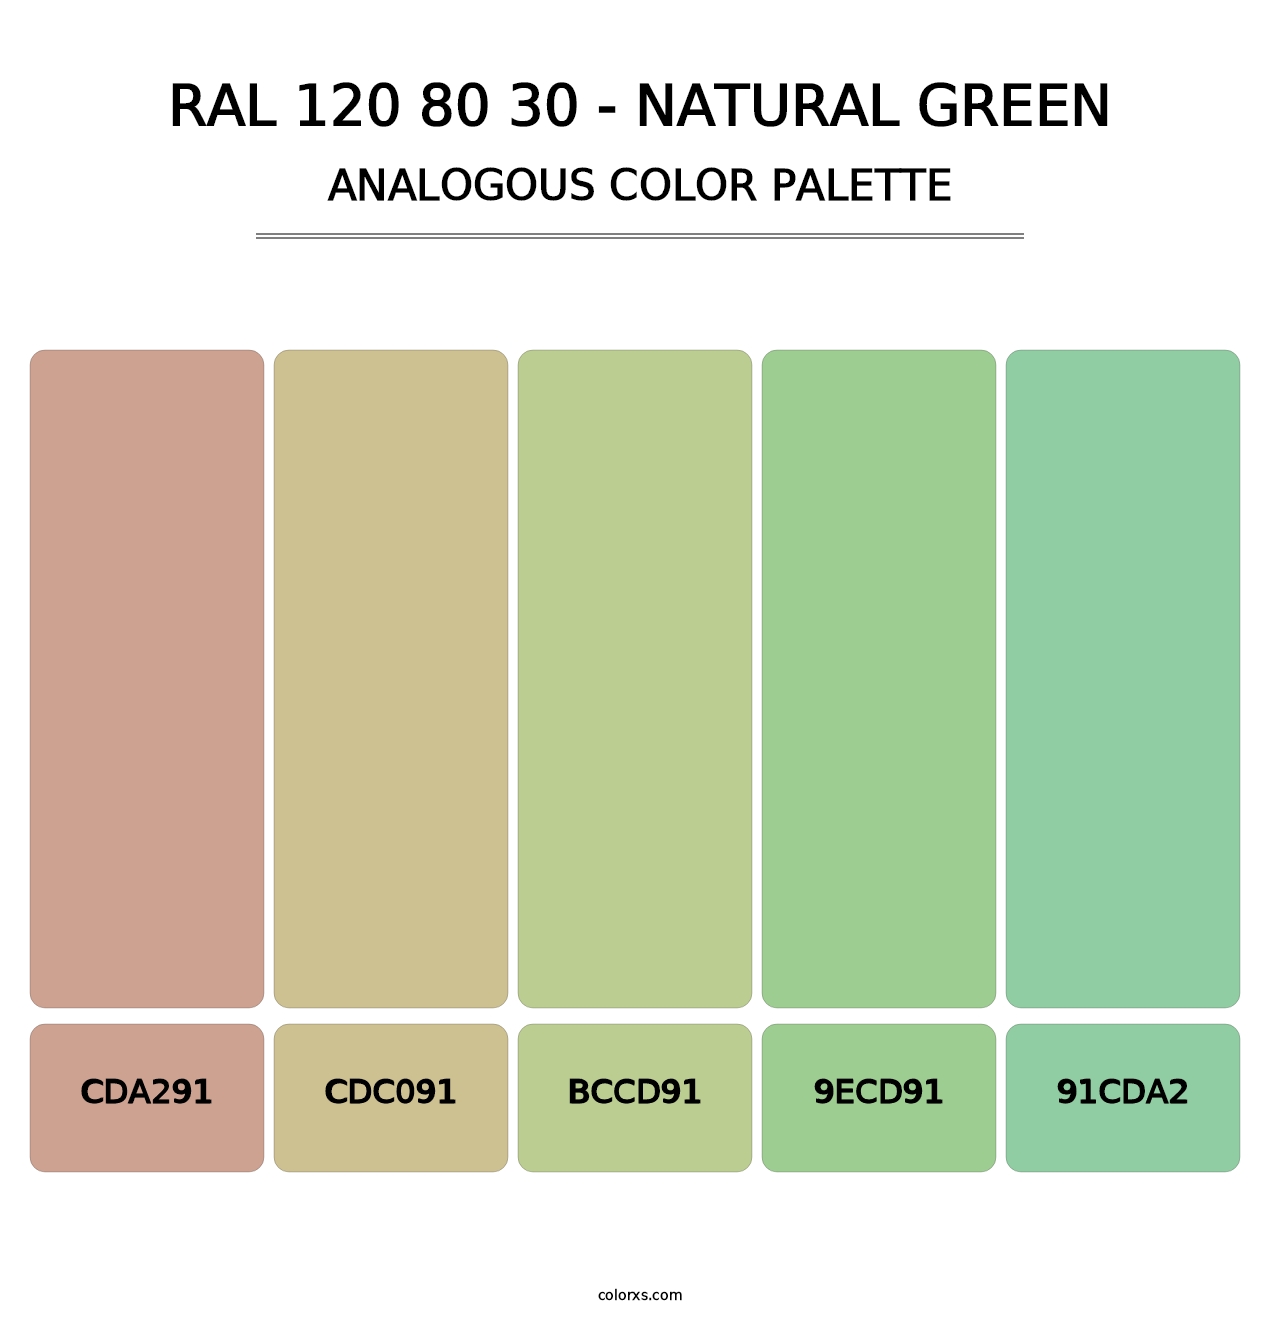 RAL 120 80 30 - Natural Green - Analogous Color Palette